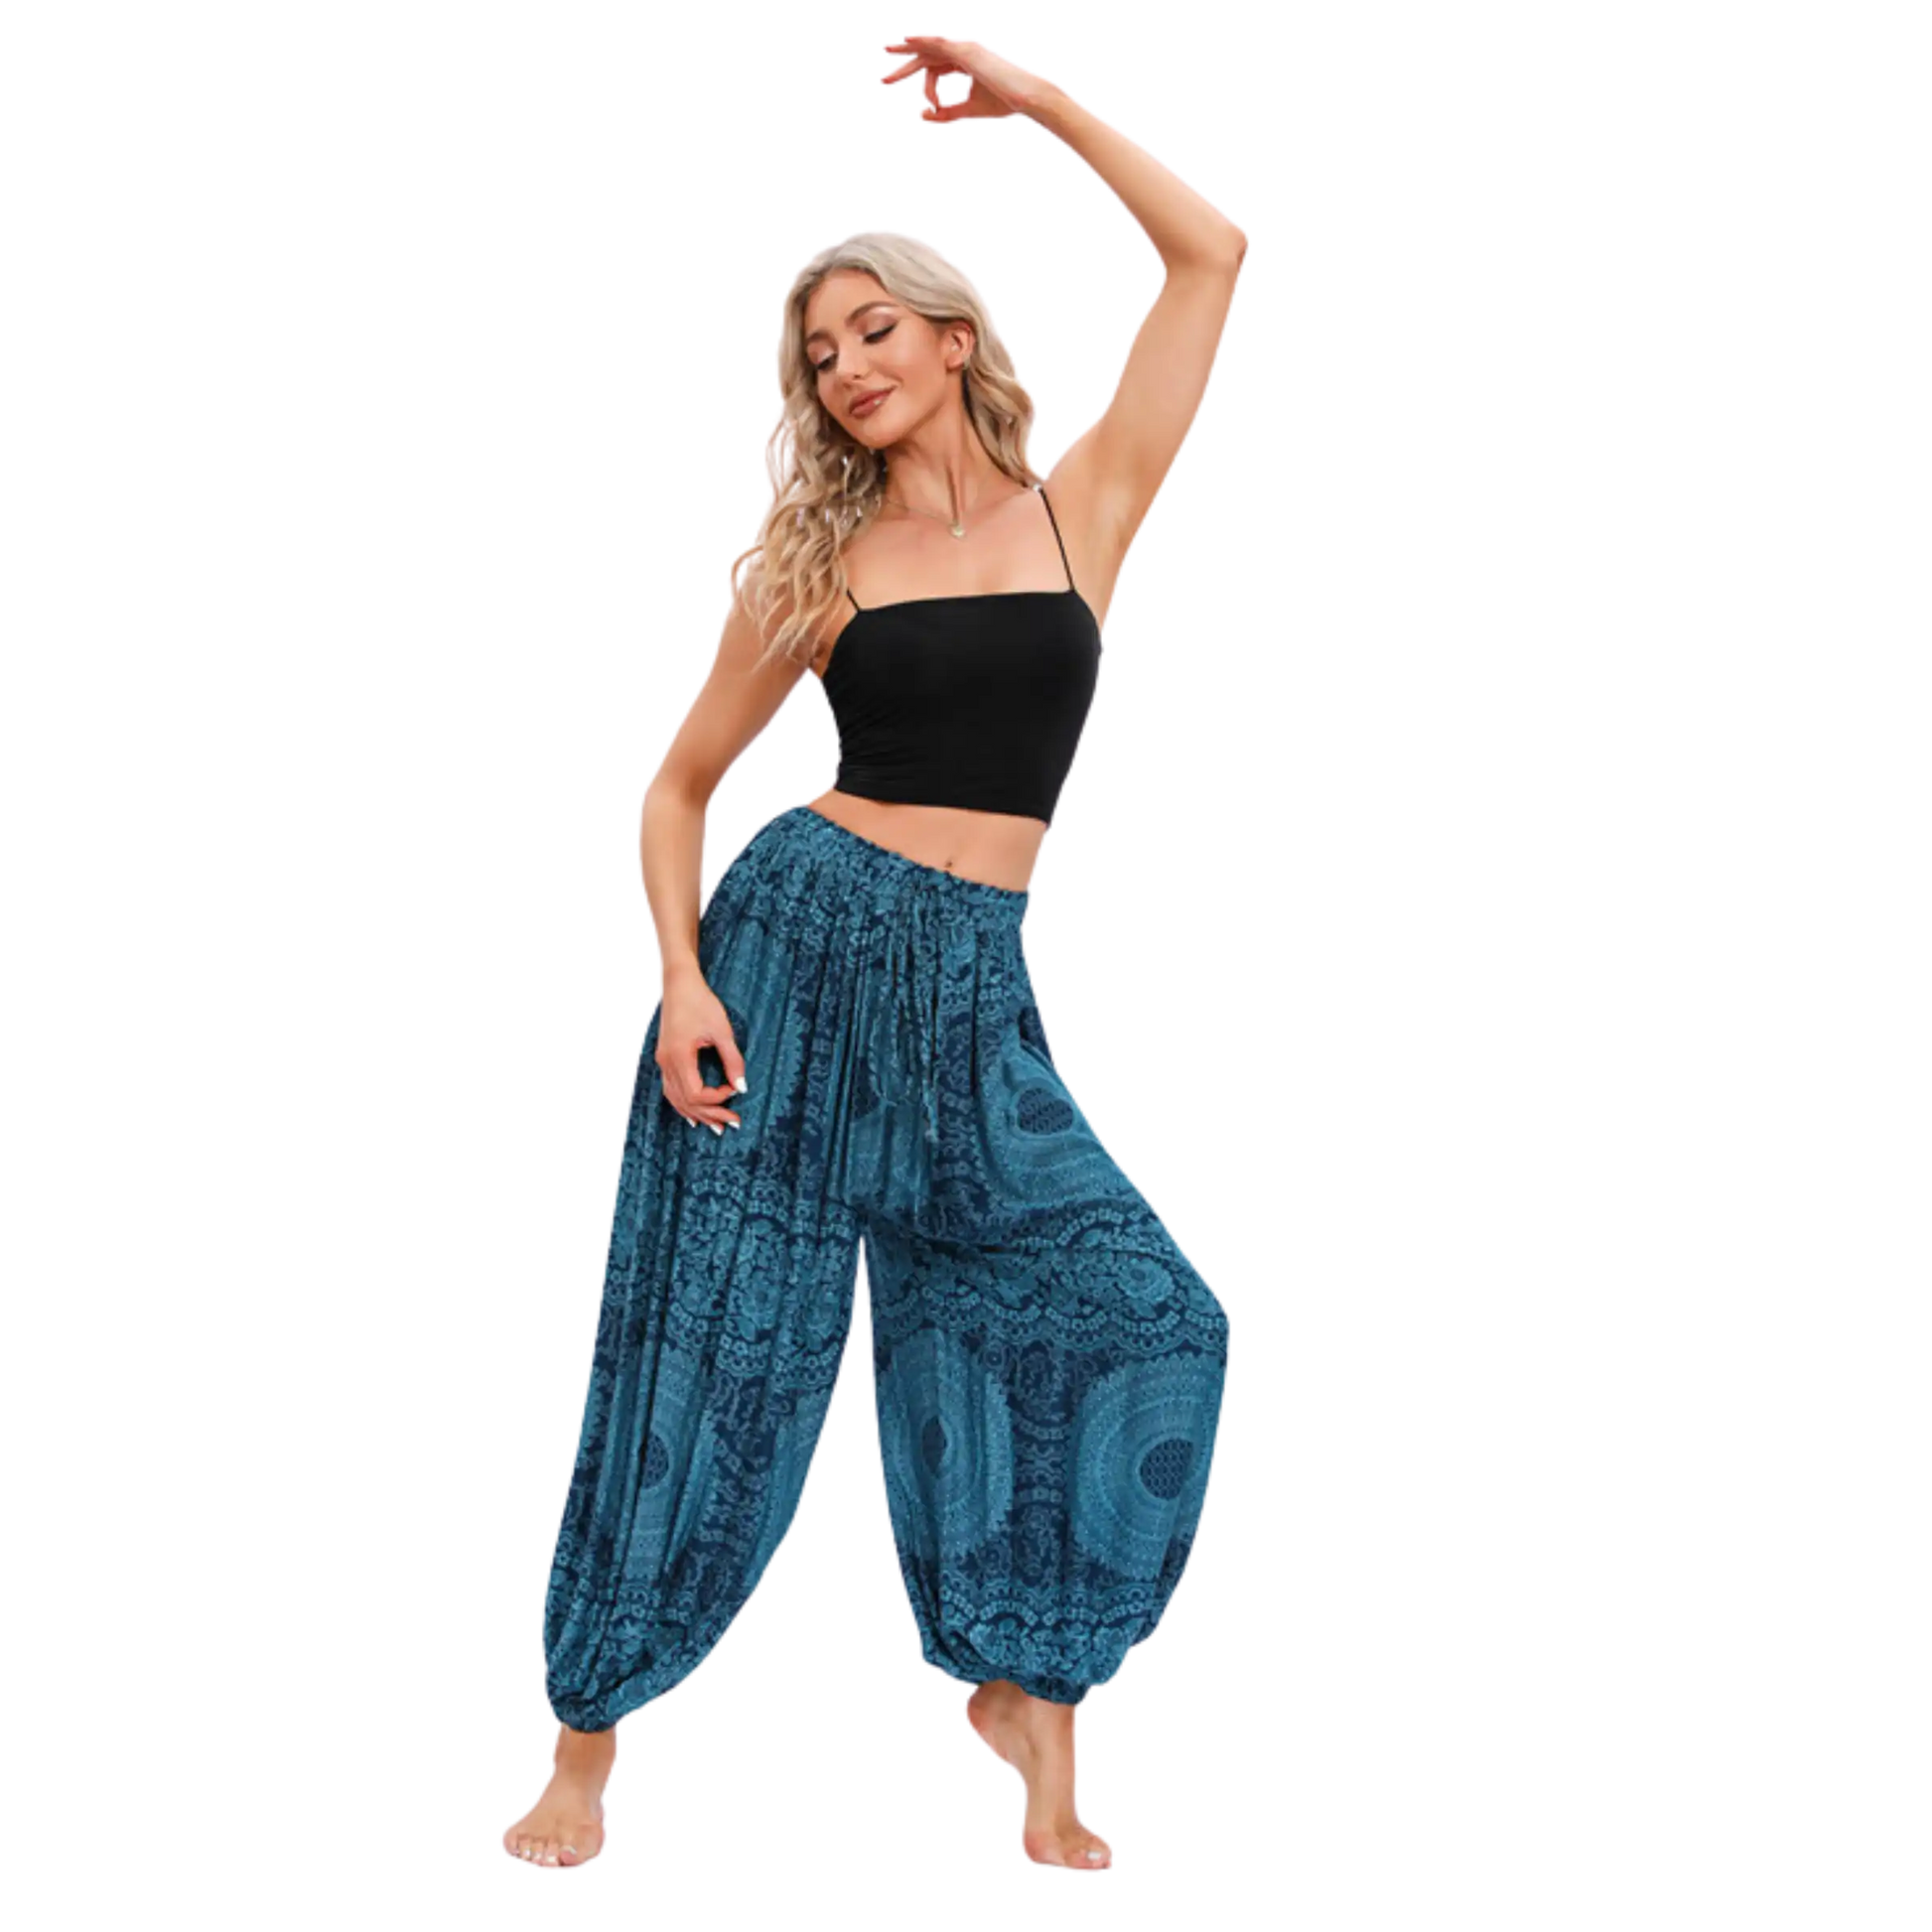 YOGA NEUTRAL CASUAL BLOOMERS - Rose Navy Blue / Average